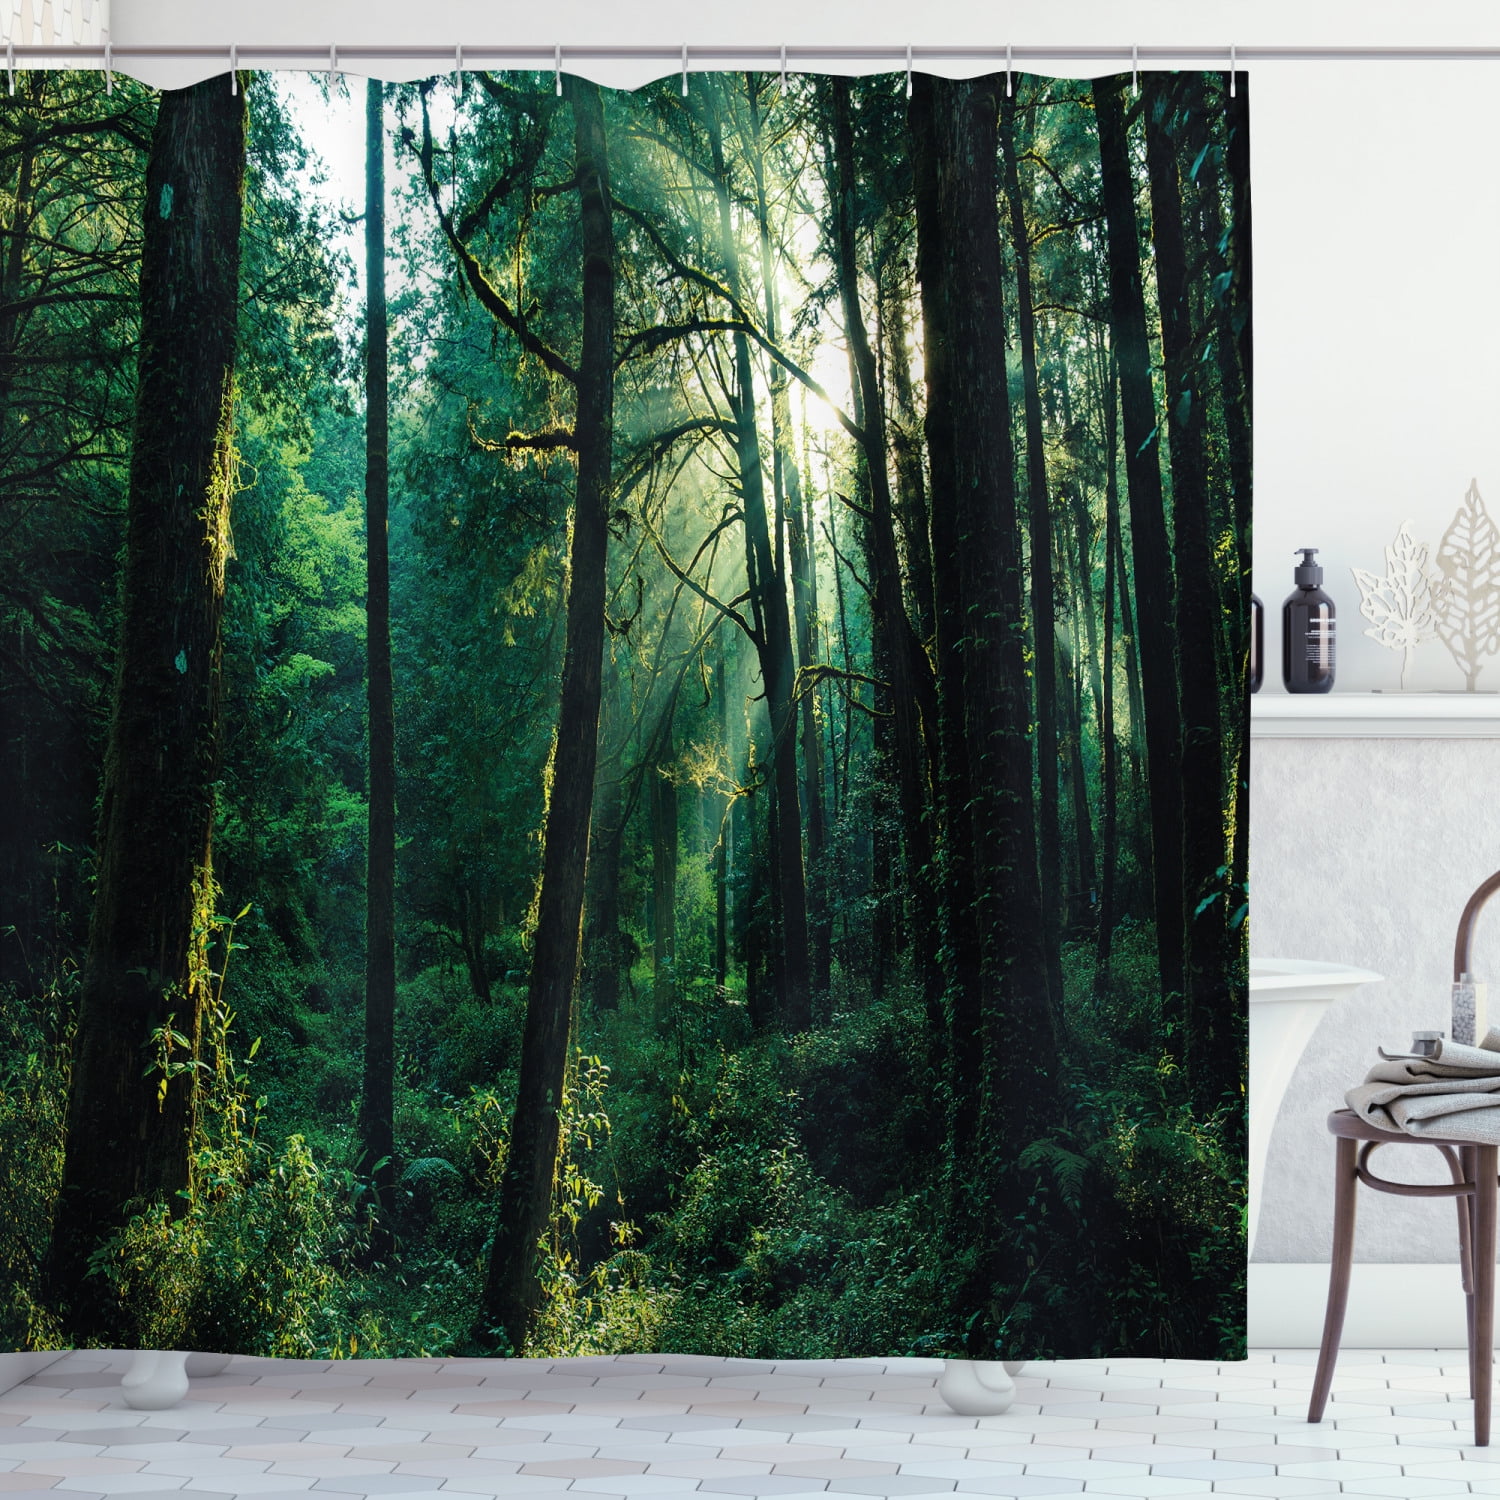 Shower Curtain Natural Scenery Green Forest Design Bathroom Waterproof Fabric 